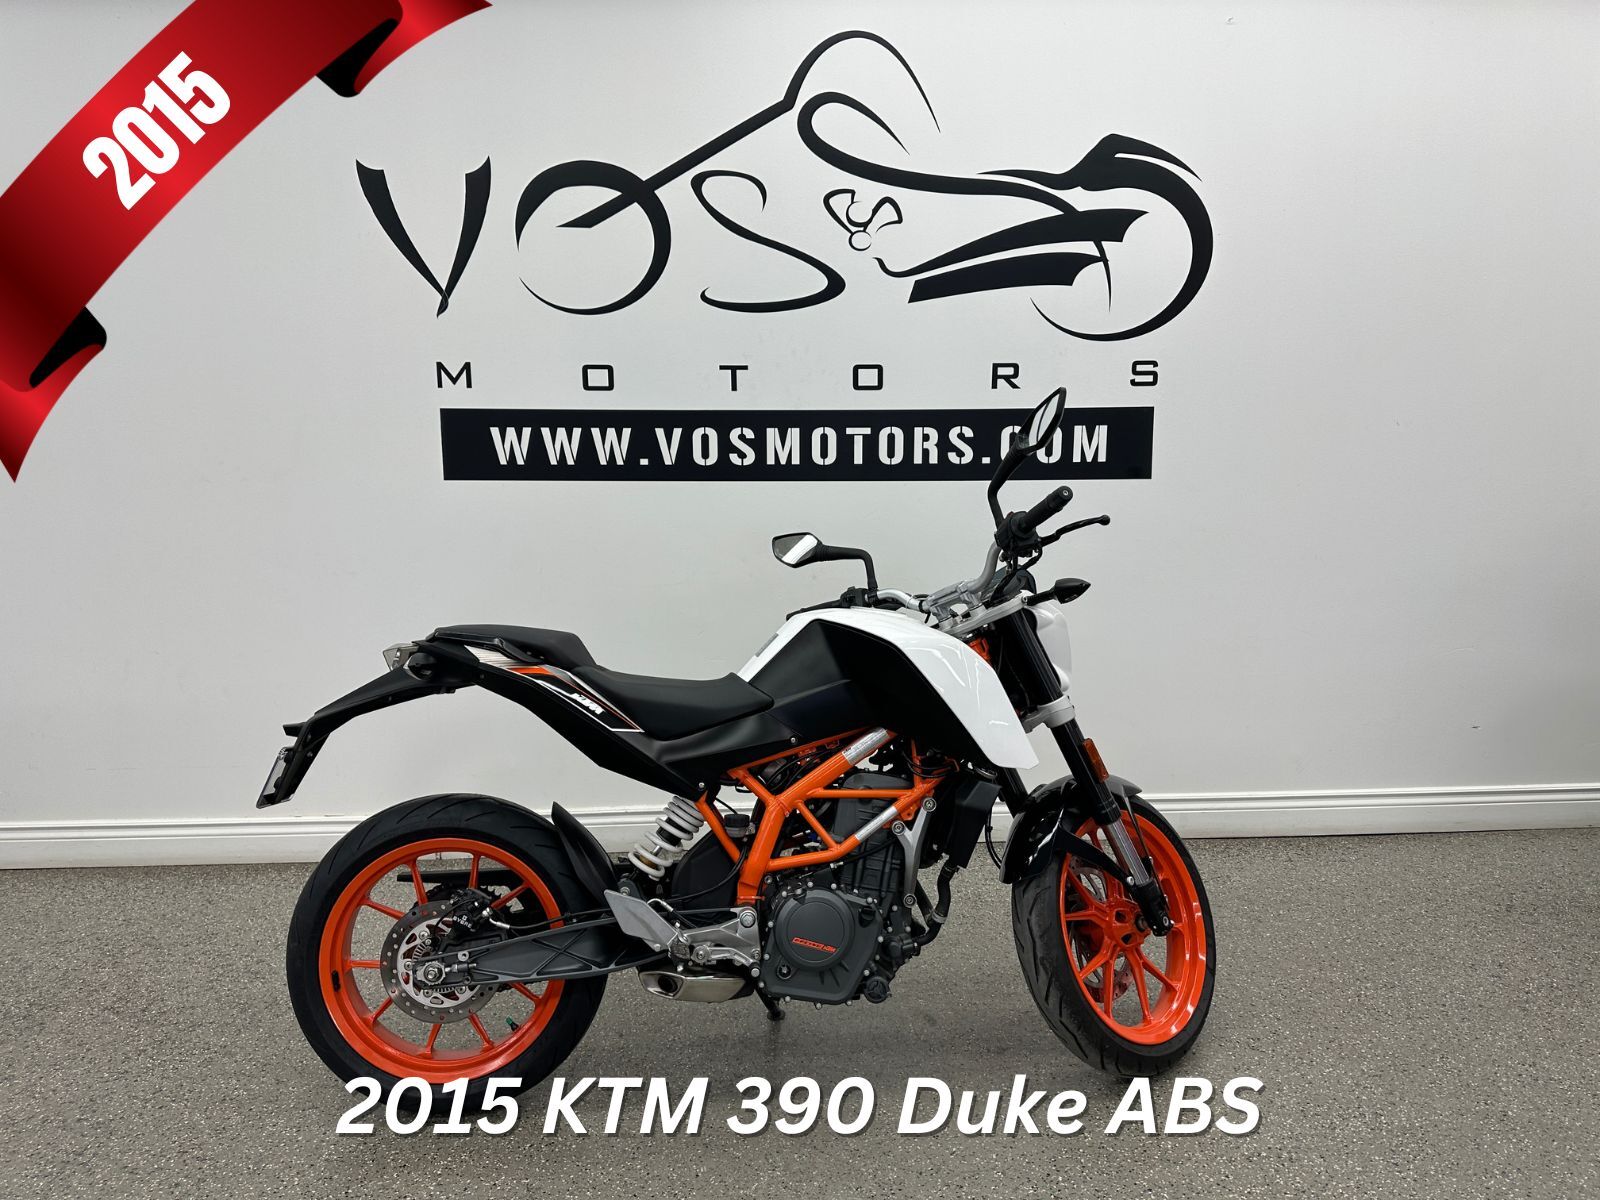 2015 KTM 390 Duke ABS Naked bike - V5935NP - -No Payments for 1 Year**